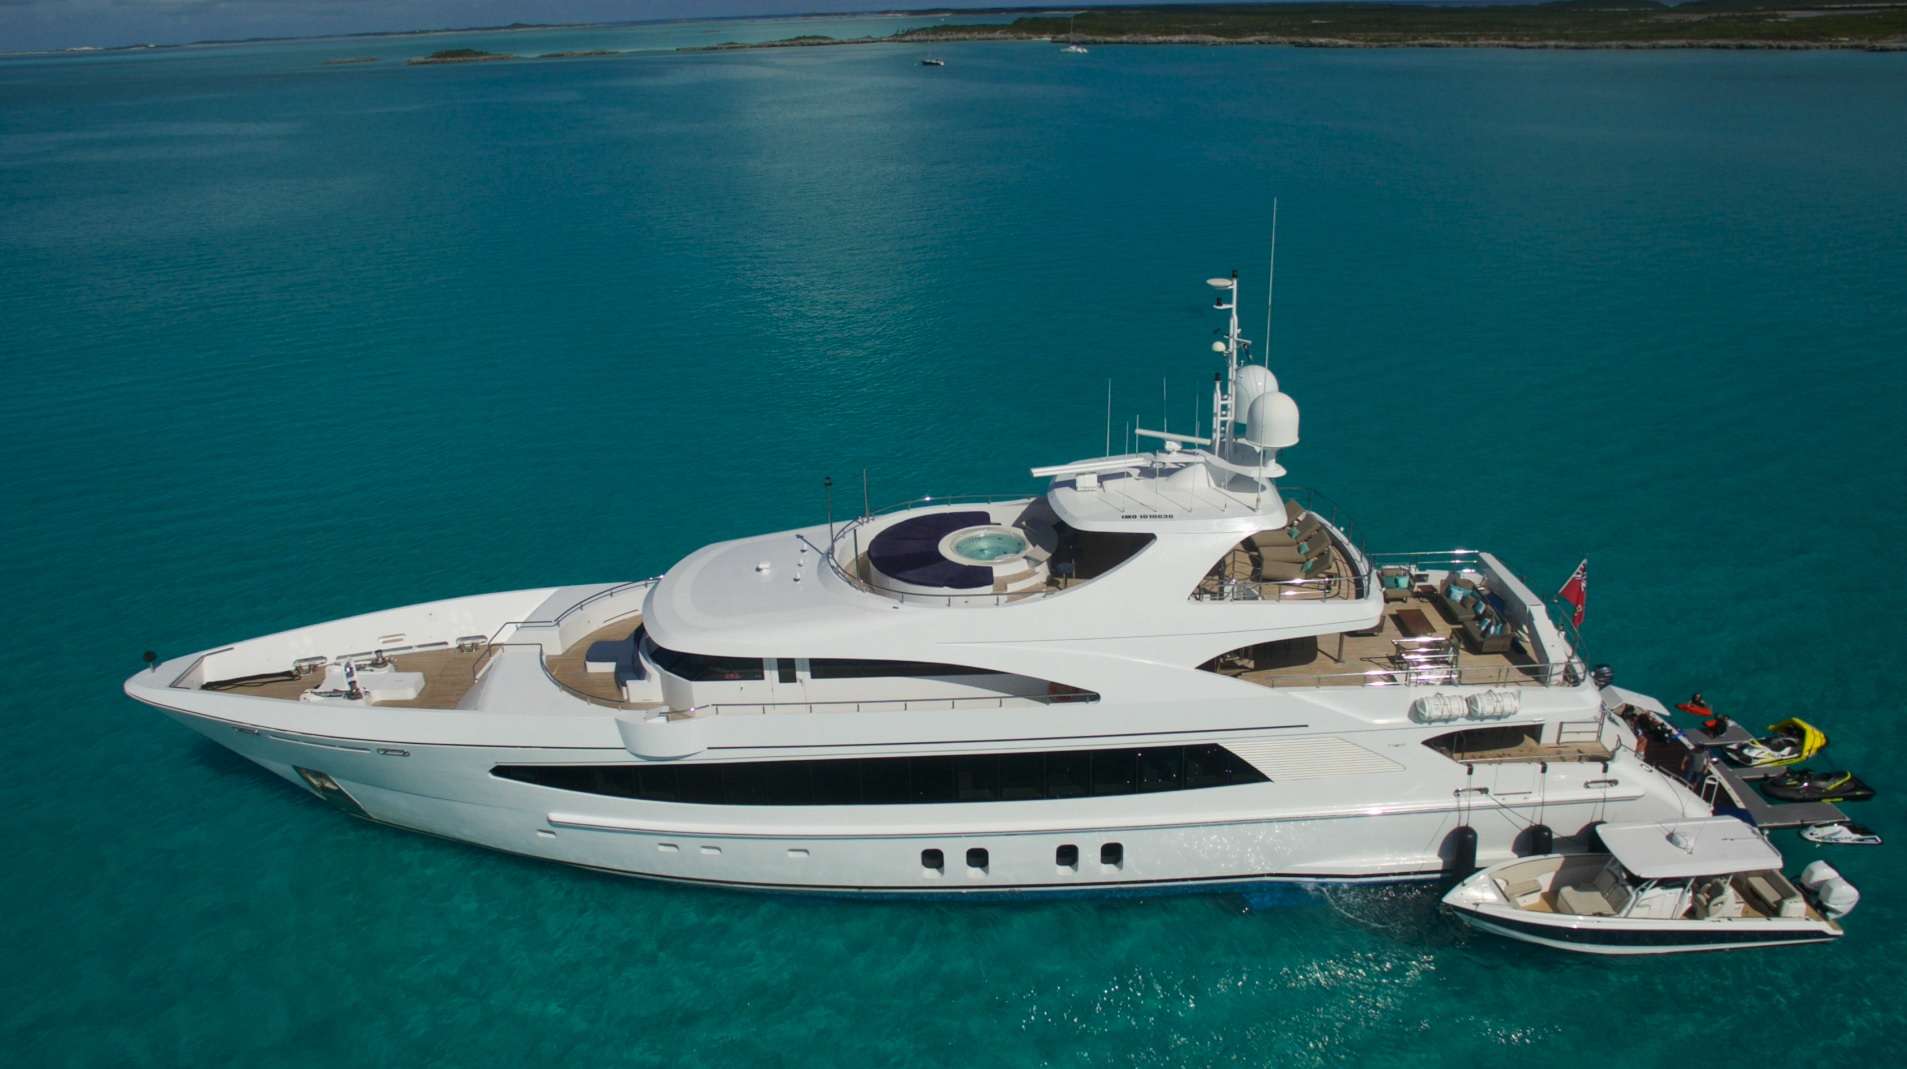 who owns yacht big sky